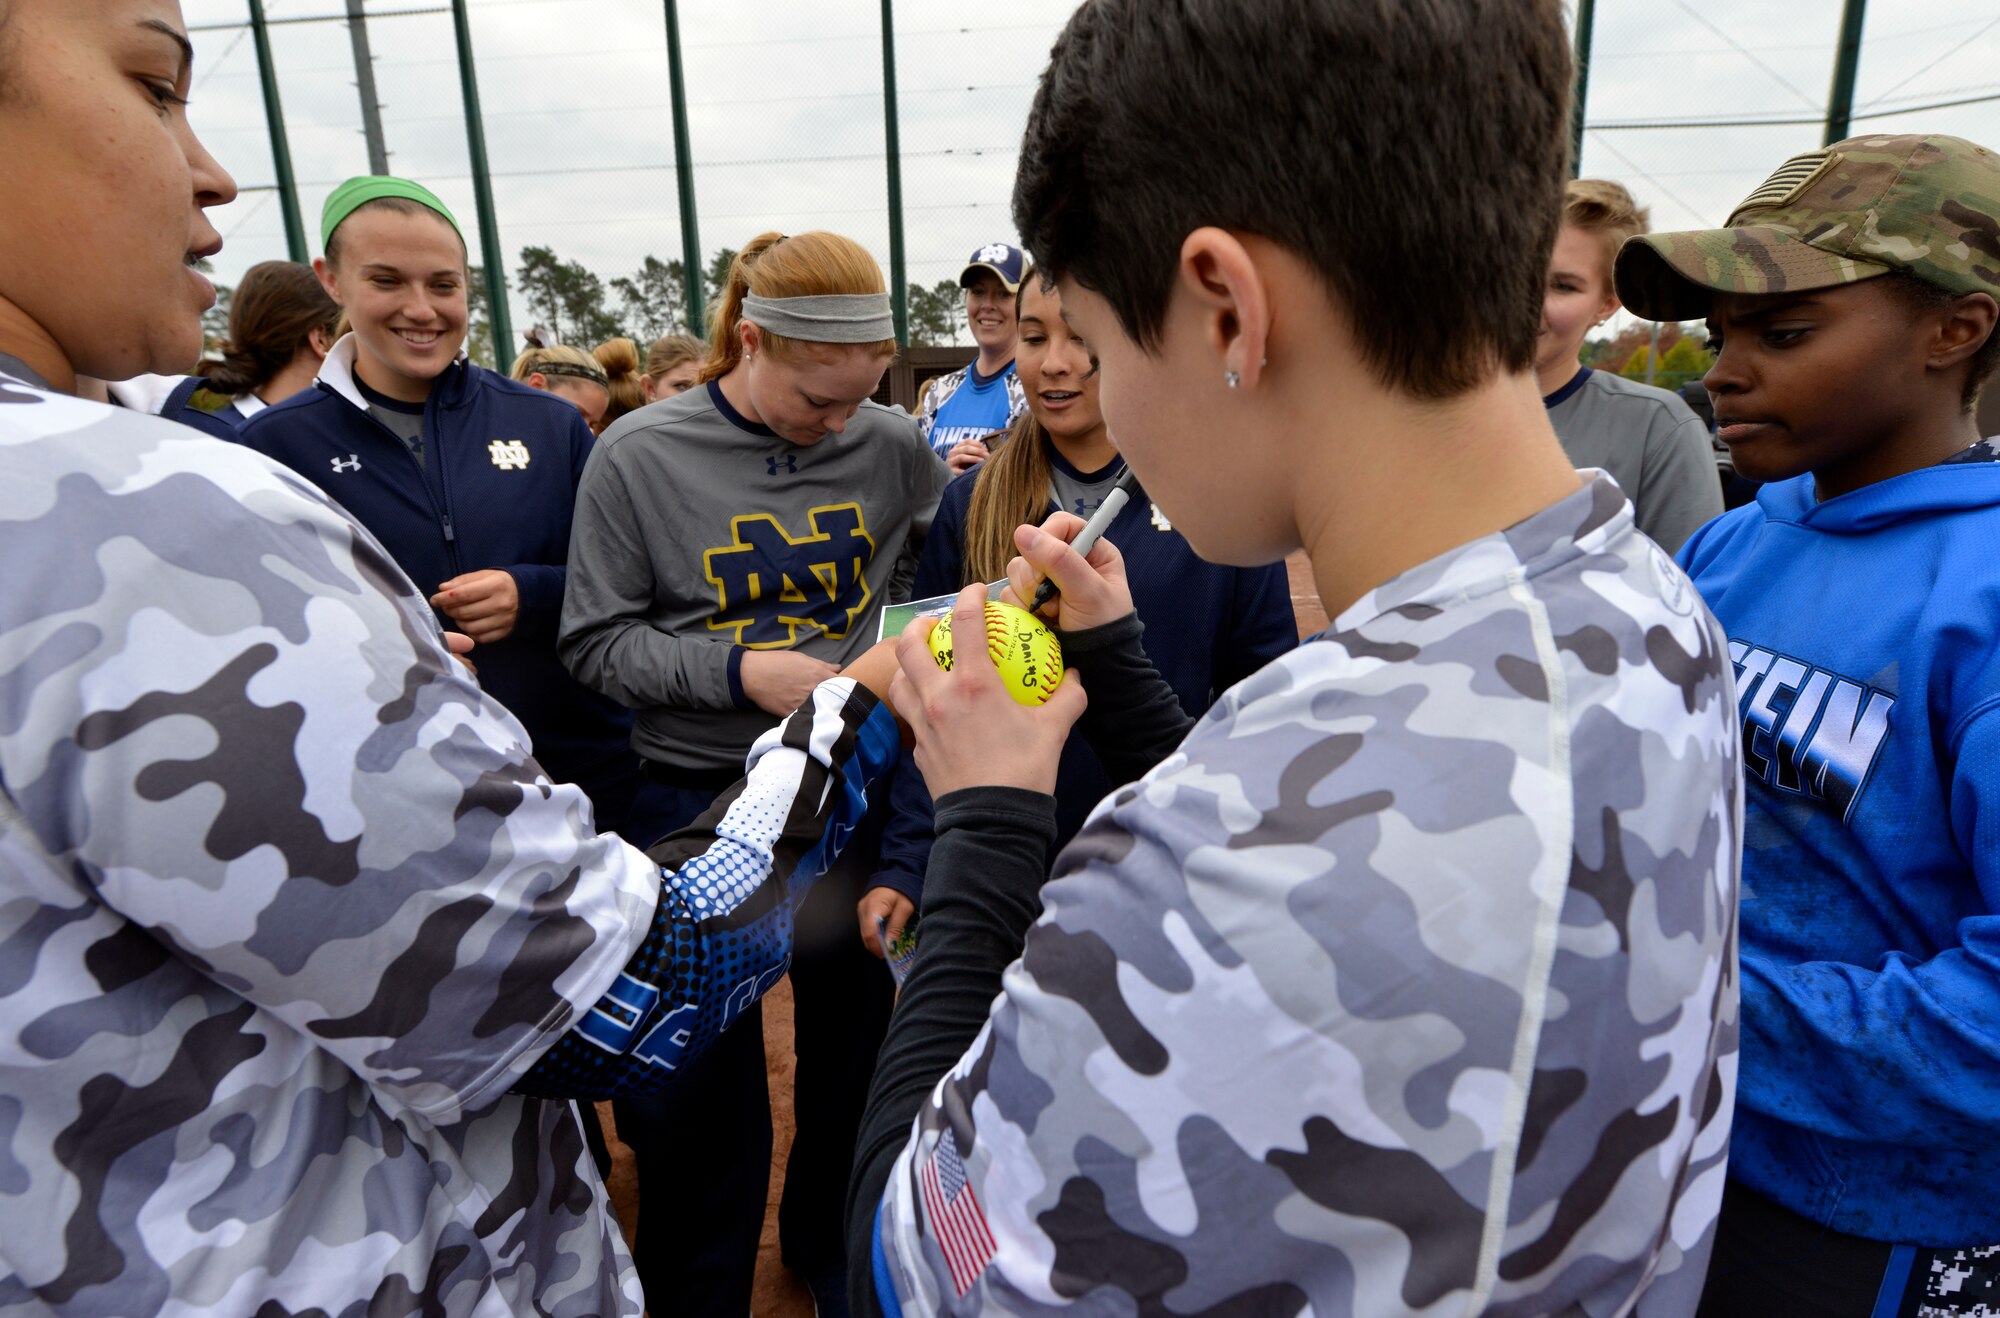 A Ramstein Air Base Lady Rams player autographs a softball for members of the University of Notre Dame softball team after a scrimmage Oct. 21, 2015, at Ramstein Air Base, Germany. The Lady Rams defeated Notre Dame by a score of 11-7. In addition to the scrimmage, the Notre Dame softball team held softball instructional clinics as part of their 10-day European tour. (U.S. Air Force photo/Staff Sgt. Sharida Jackson)